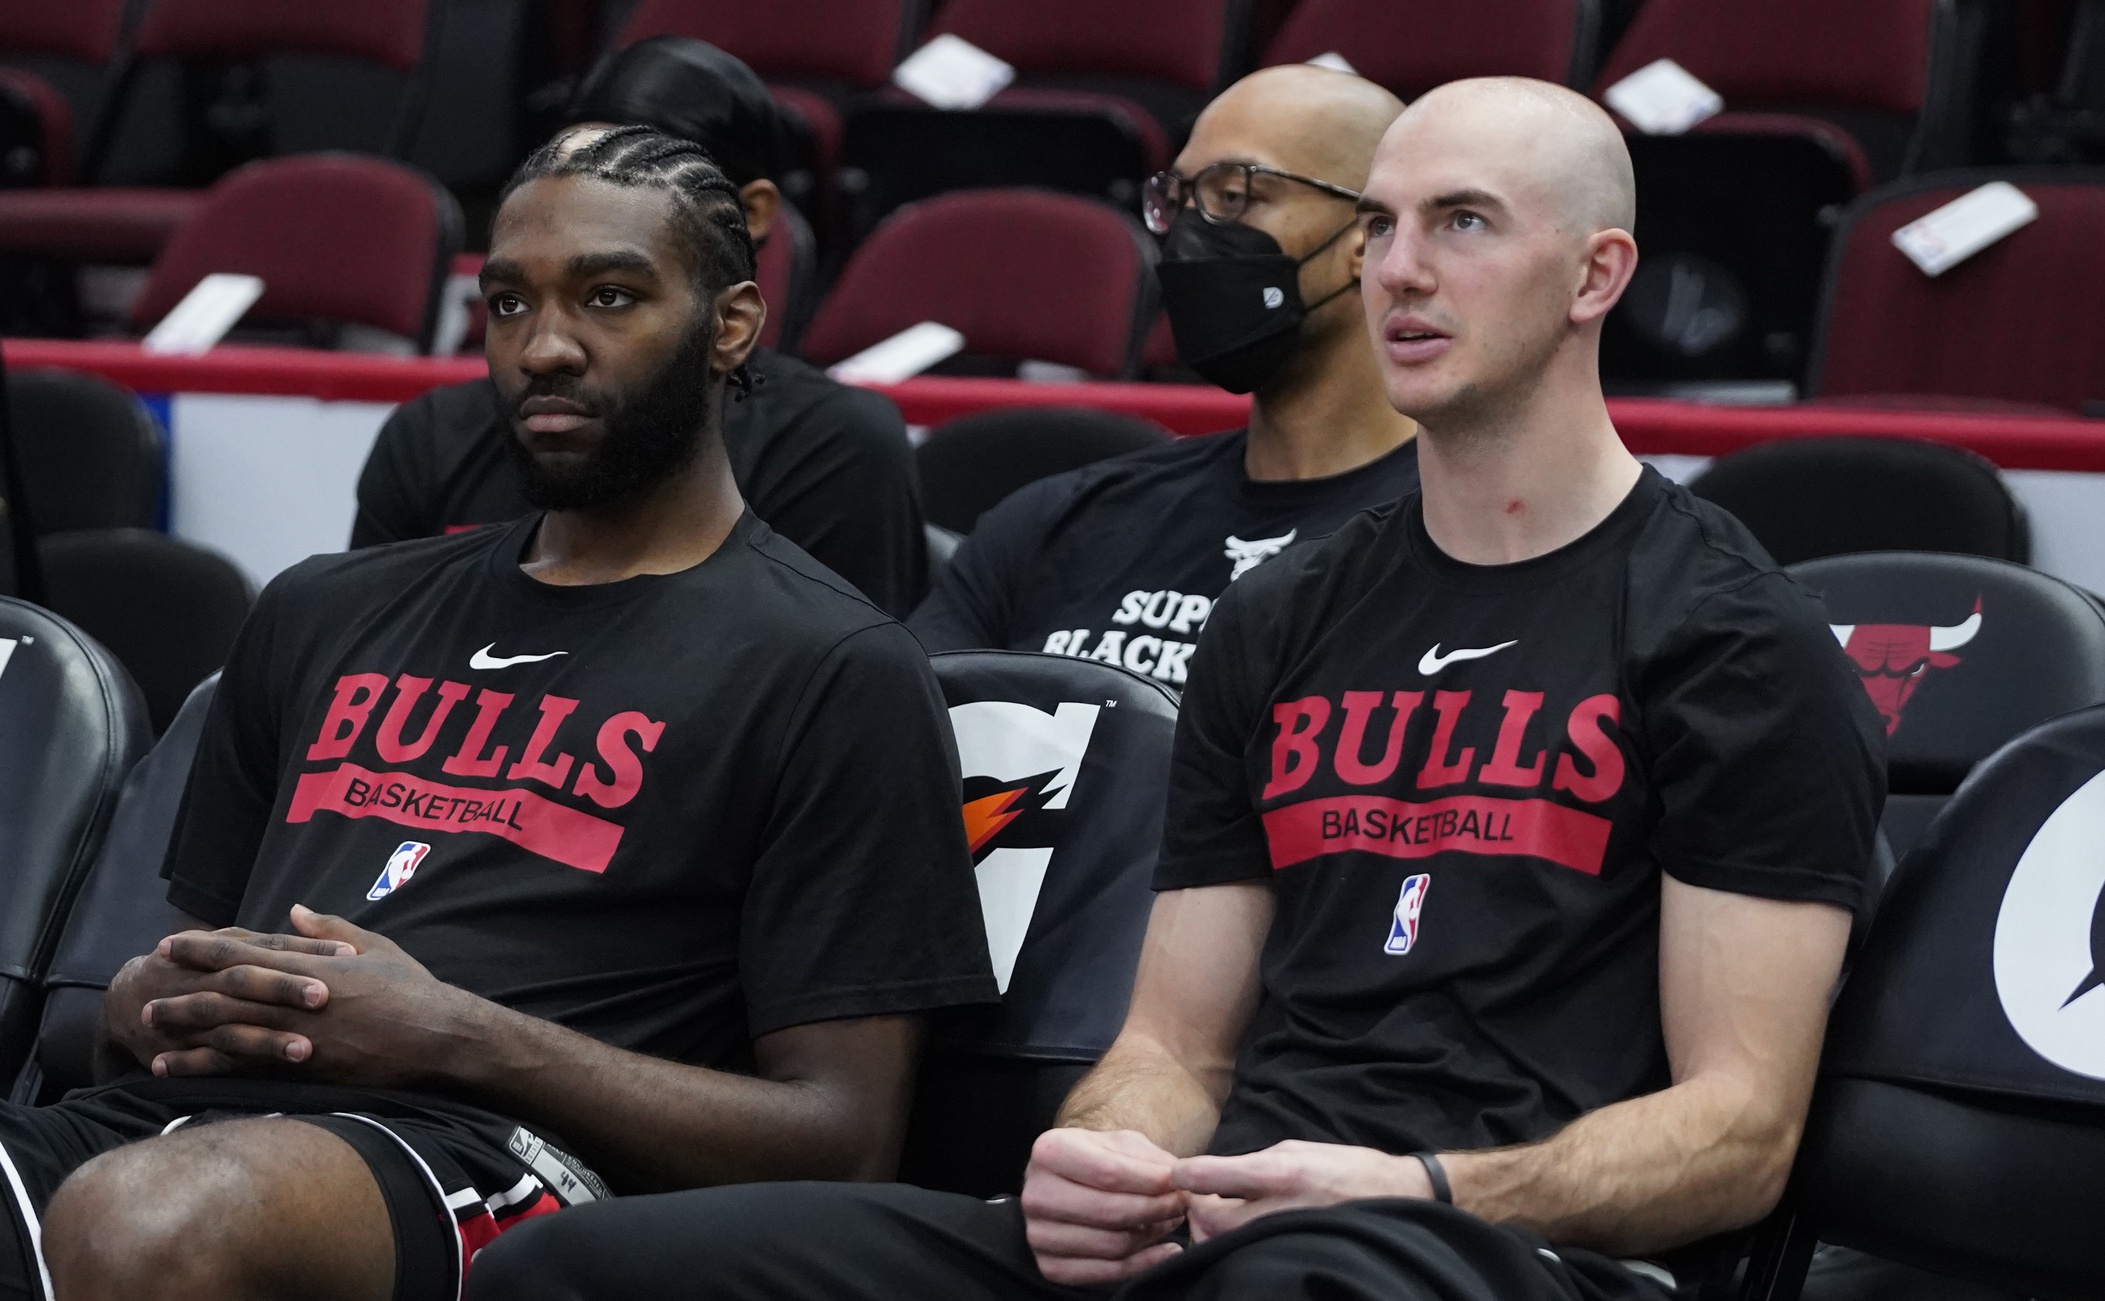 Mar 5, 2023; Chicago, Illinois, USA; Chicago Bulls forward Patrick Williams (left) and guard Alex Caruso (6) watch warms up before the game against the Indiana Pacers at United Center. Mandatory Credit: David Banks-USA TODAY Sports